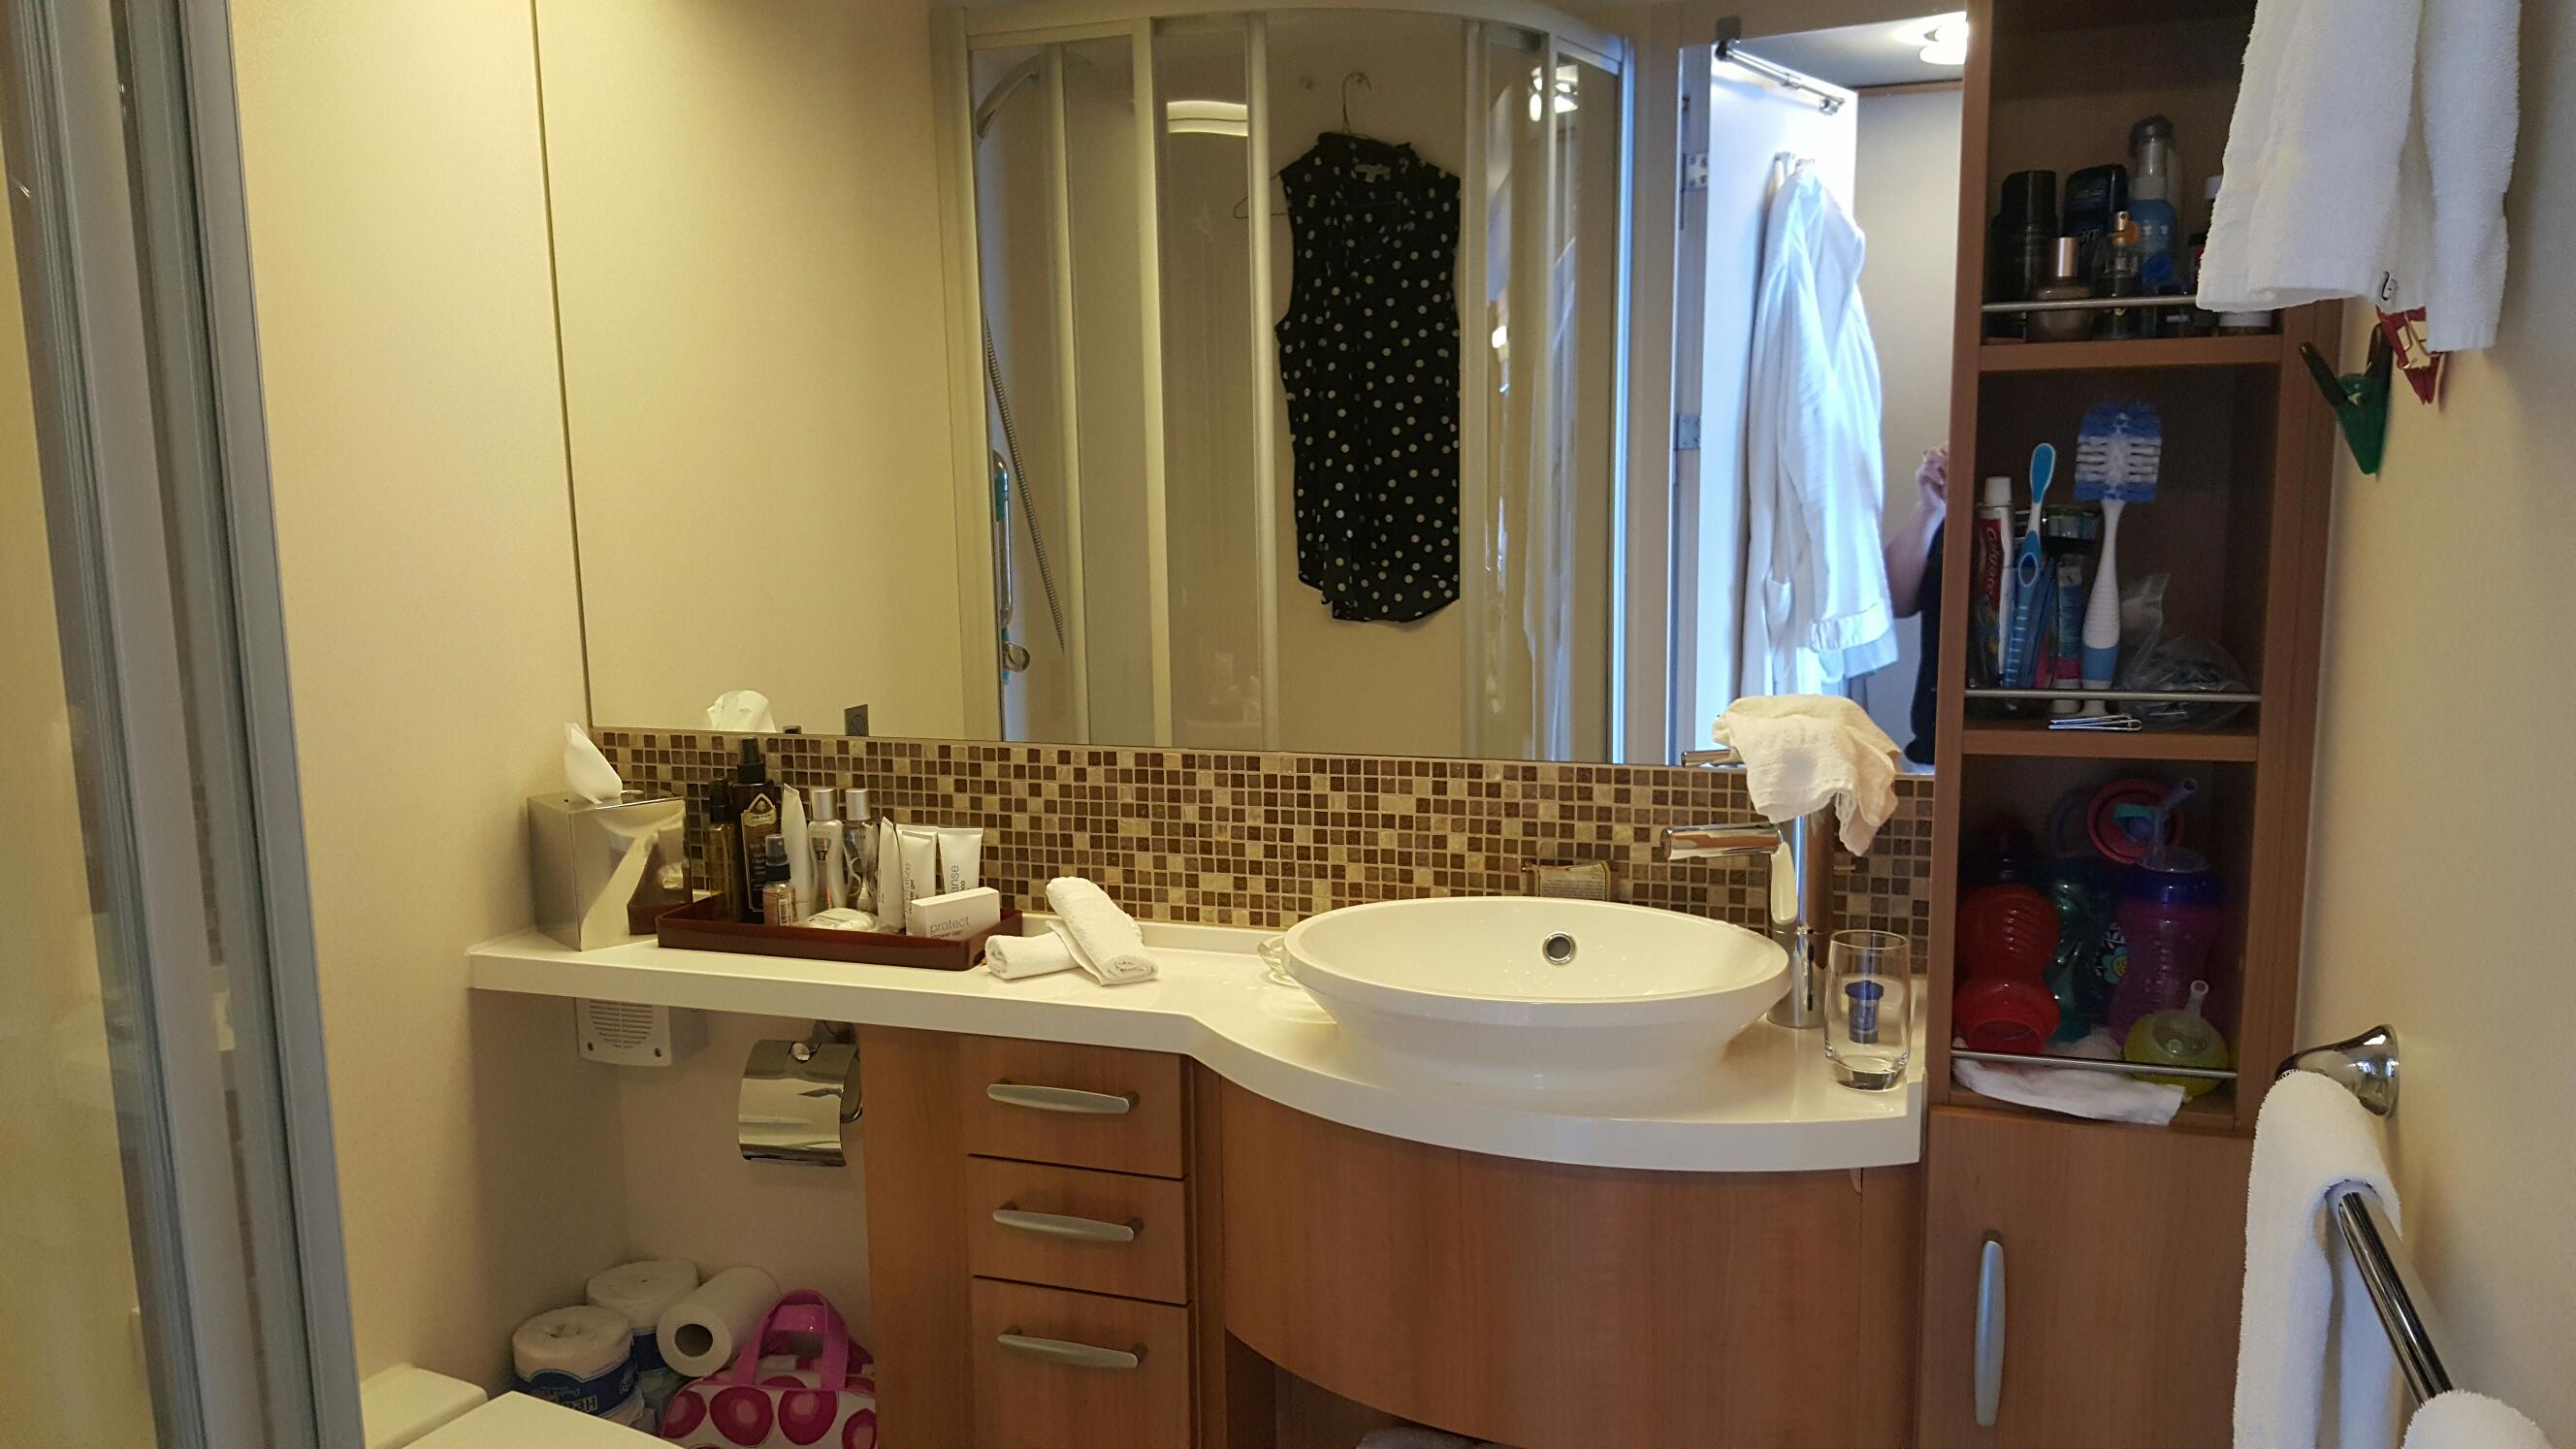 celebrity reflection cabins